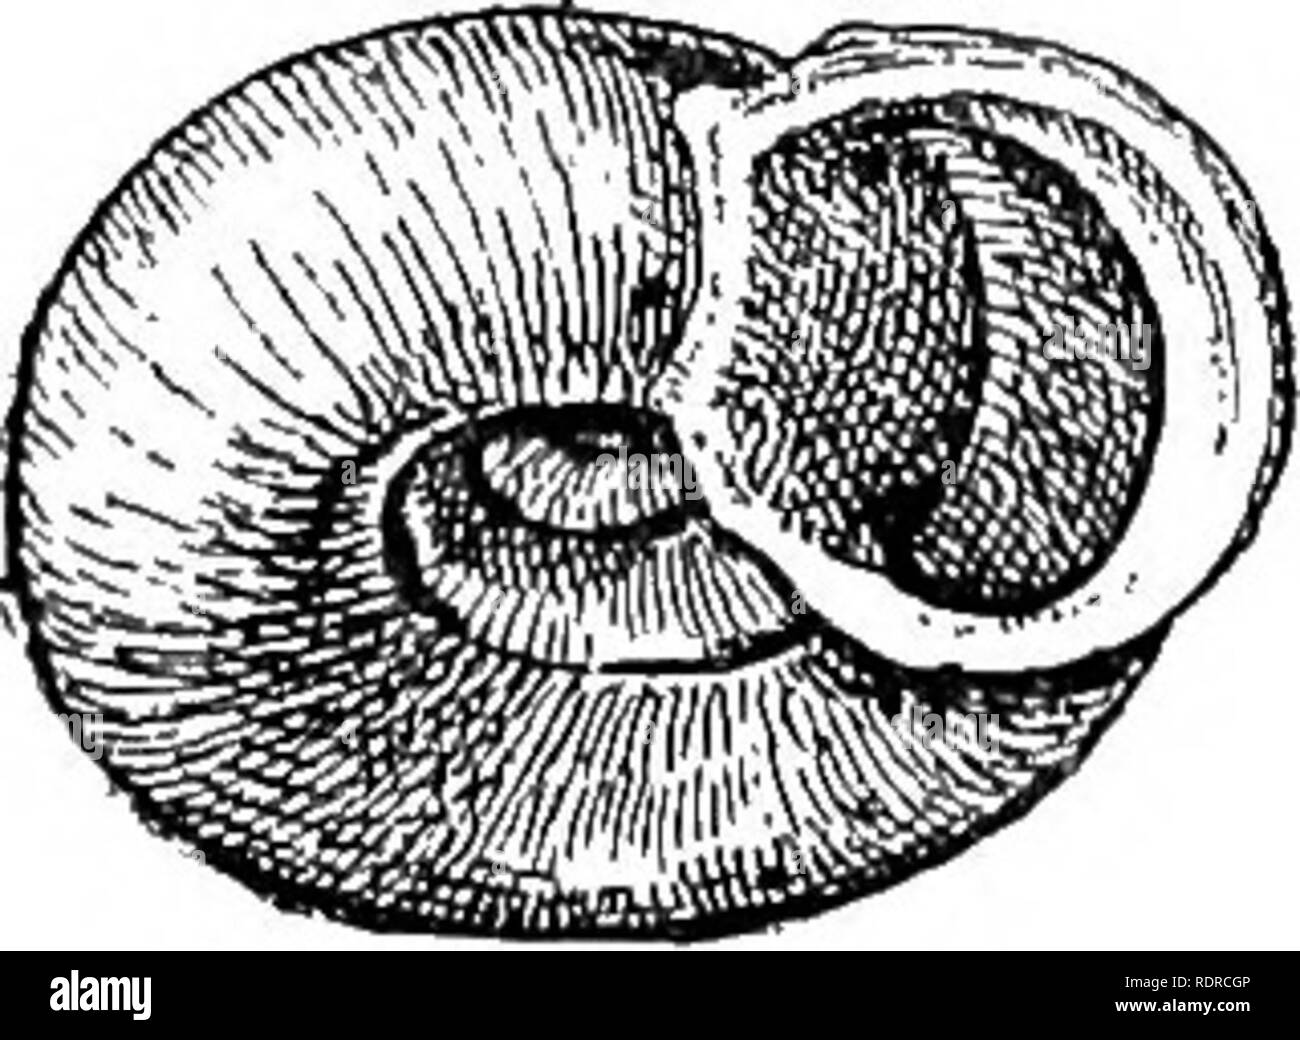 . Mollusca ... Mollusks. 56 HEXilCIDiE. y. Three parietal folds, *. Shell elliptic, palatal folds short, second scarcely curved. t. Lip much reflected. §. Two upper palatal folds terminating near the peristome colletti. §§. Palatal folds terminating further hack carabinata. It. Lip little reflected. §. Shell strongly and regularly rihbed. gudei. §§. Shell more faintly and irregularly ribbed. 1. Third palatal fold almost hori- zontal e7Tonea, 2. Fold.&quot;! very short, nearer aperture, third palatal fold very oblique, ascending v. erronella. **. Shell rounded, palatal folds longer, second much Stock Photo